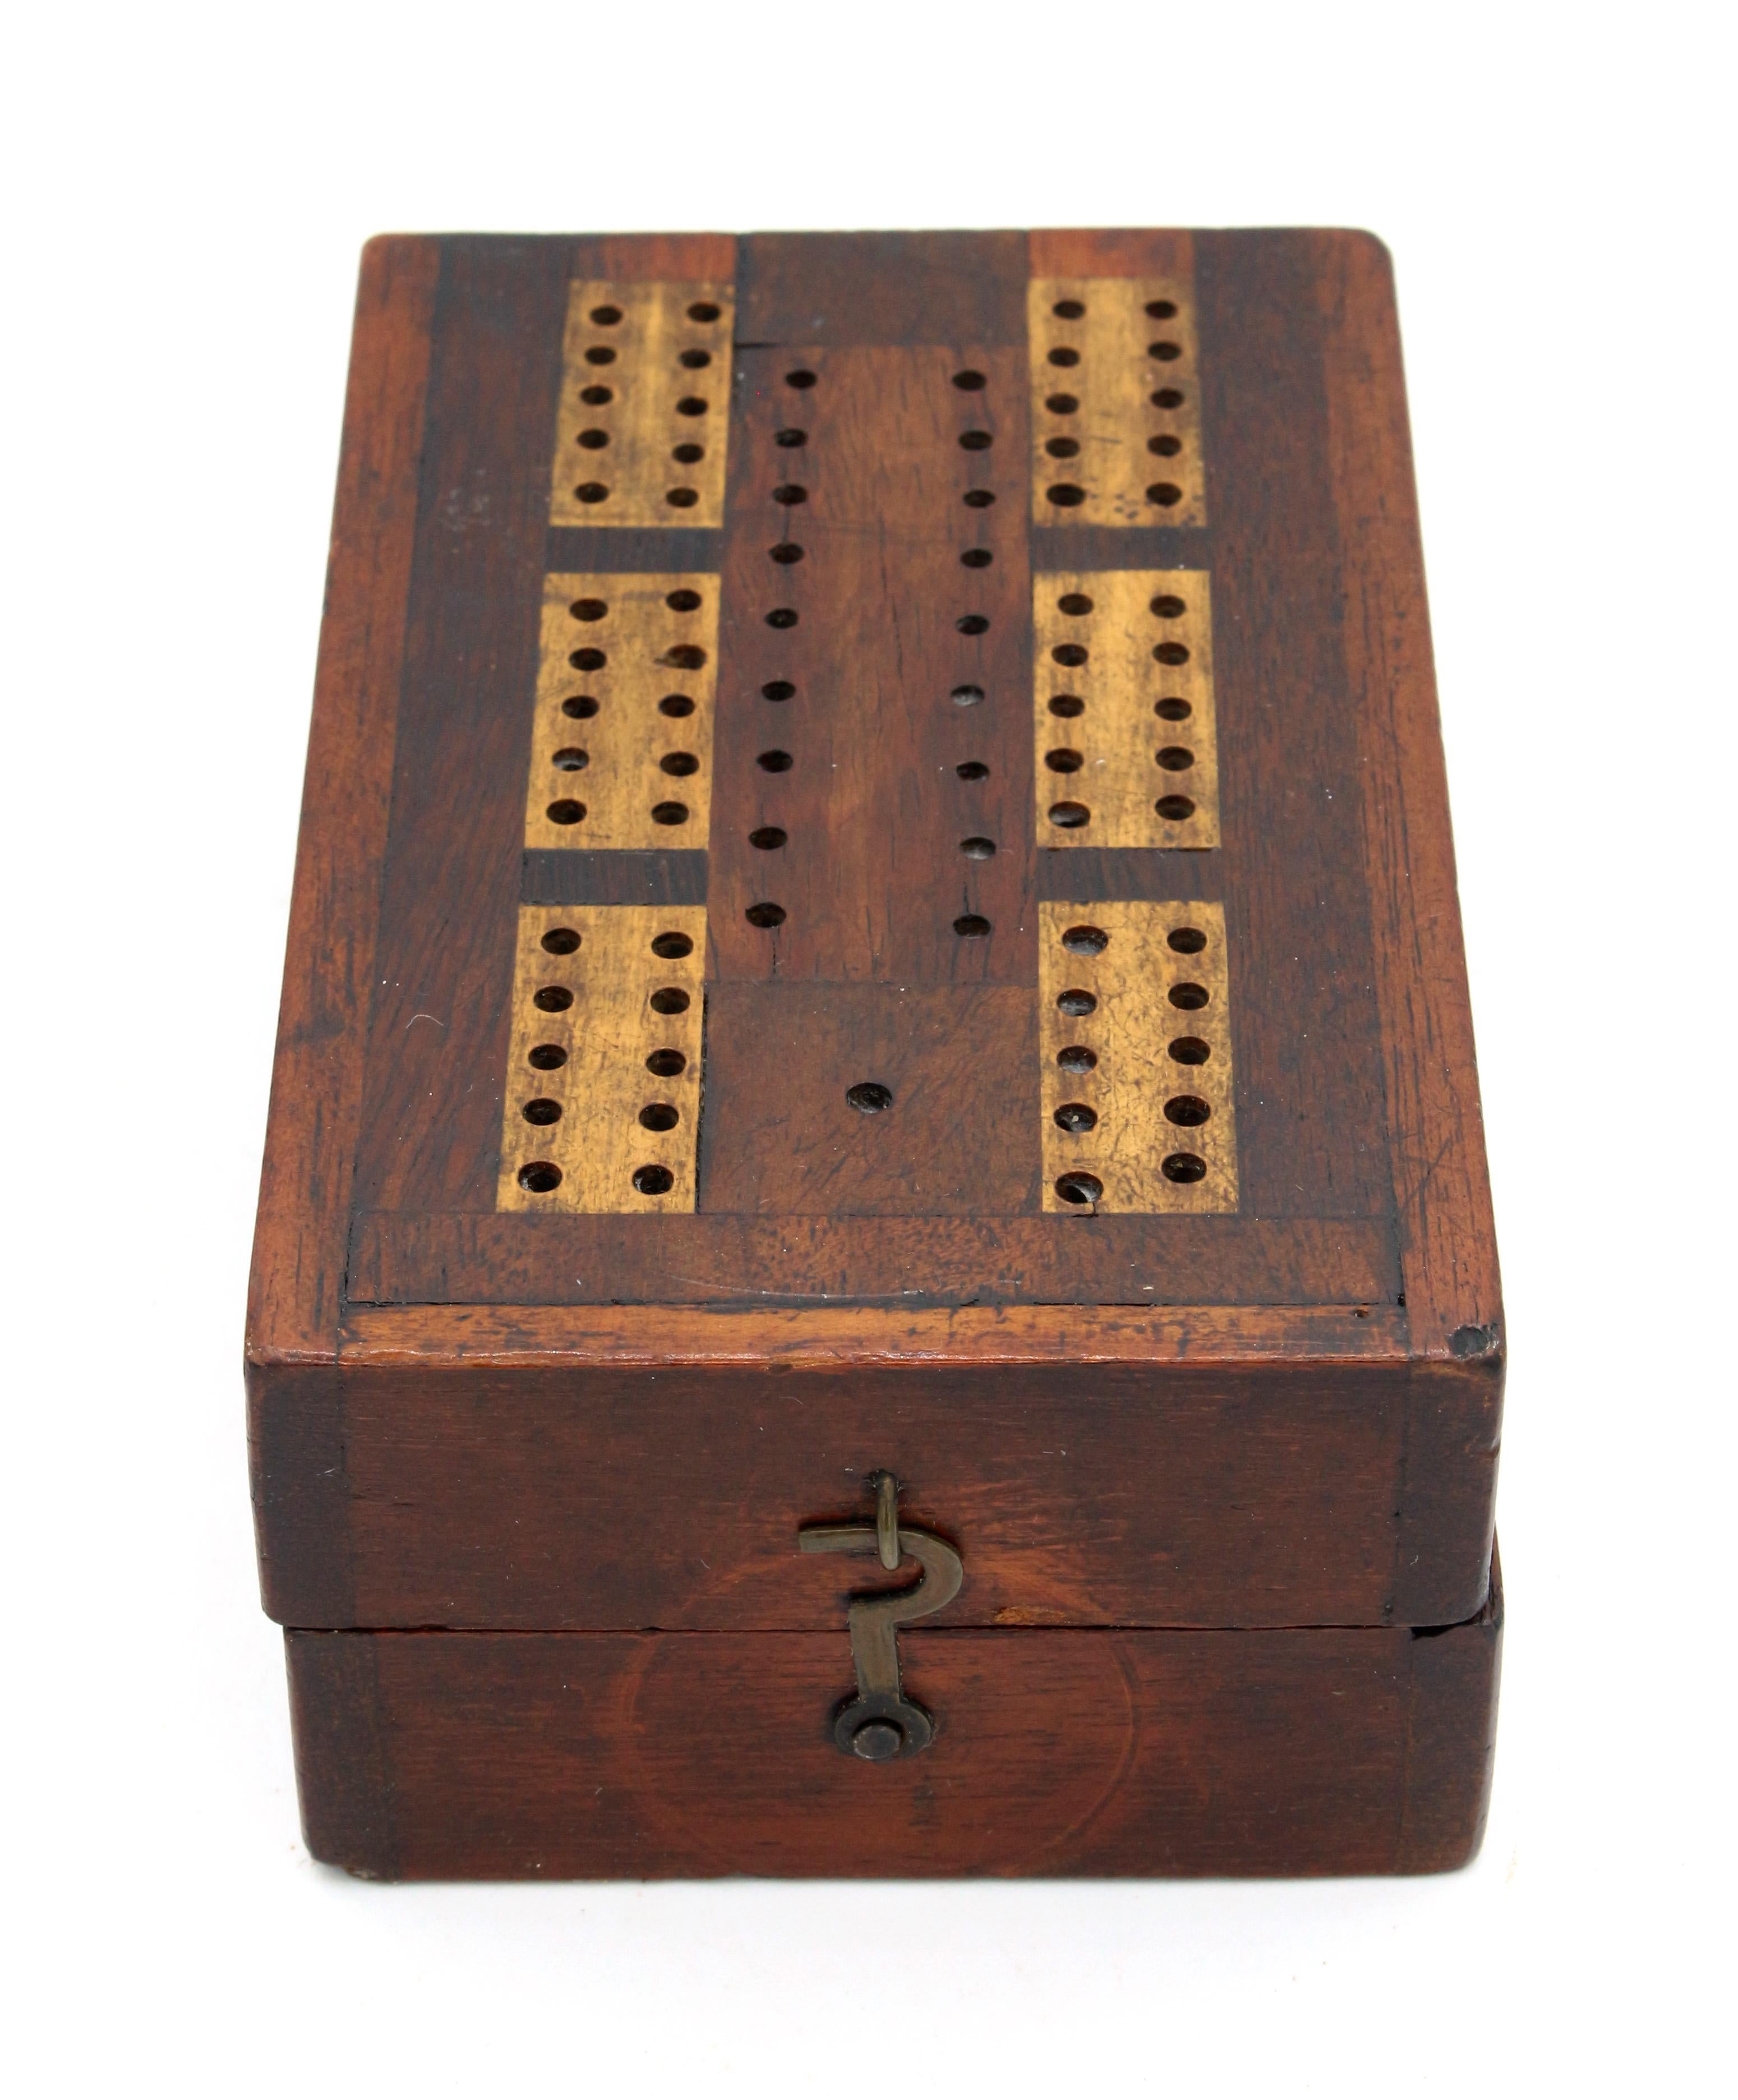 Late 19th-early 20th century travel folding cribbage board box, English. Slight flex up in the middle when open.
5 1/8